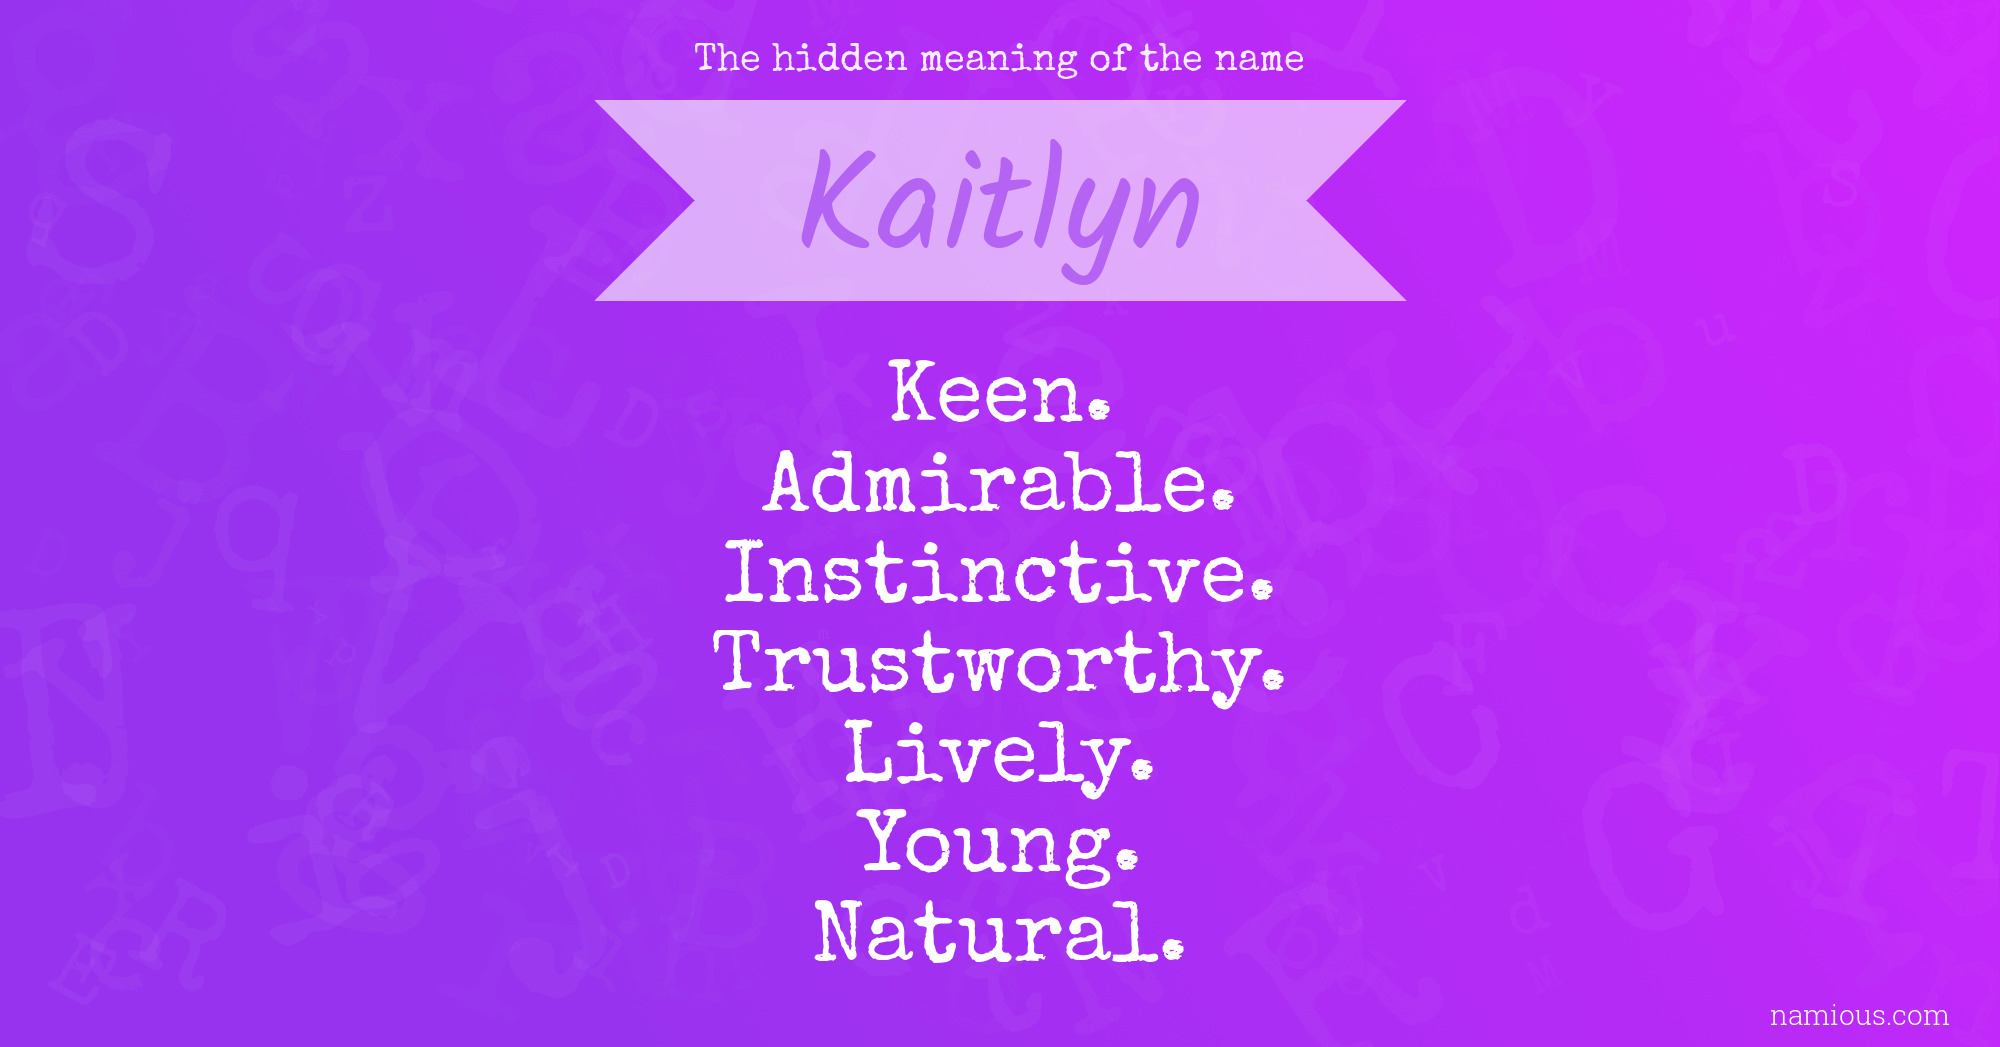 The hidden meaning of the name Kaitlyn